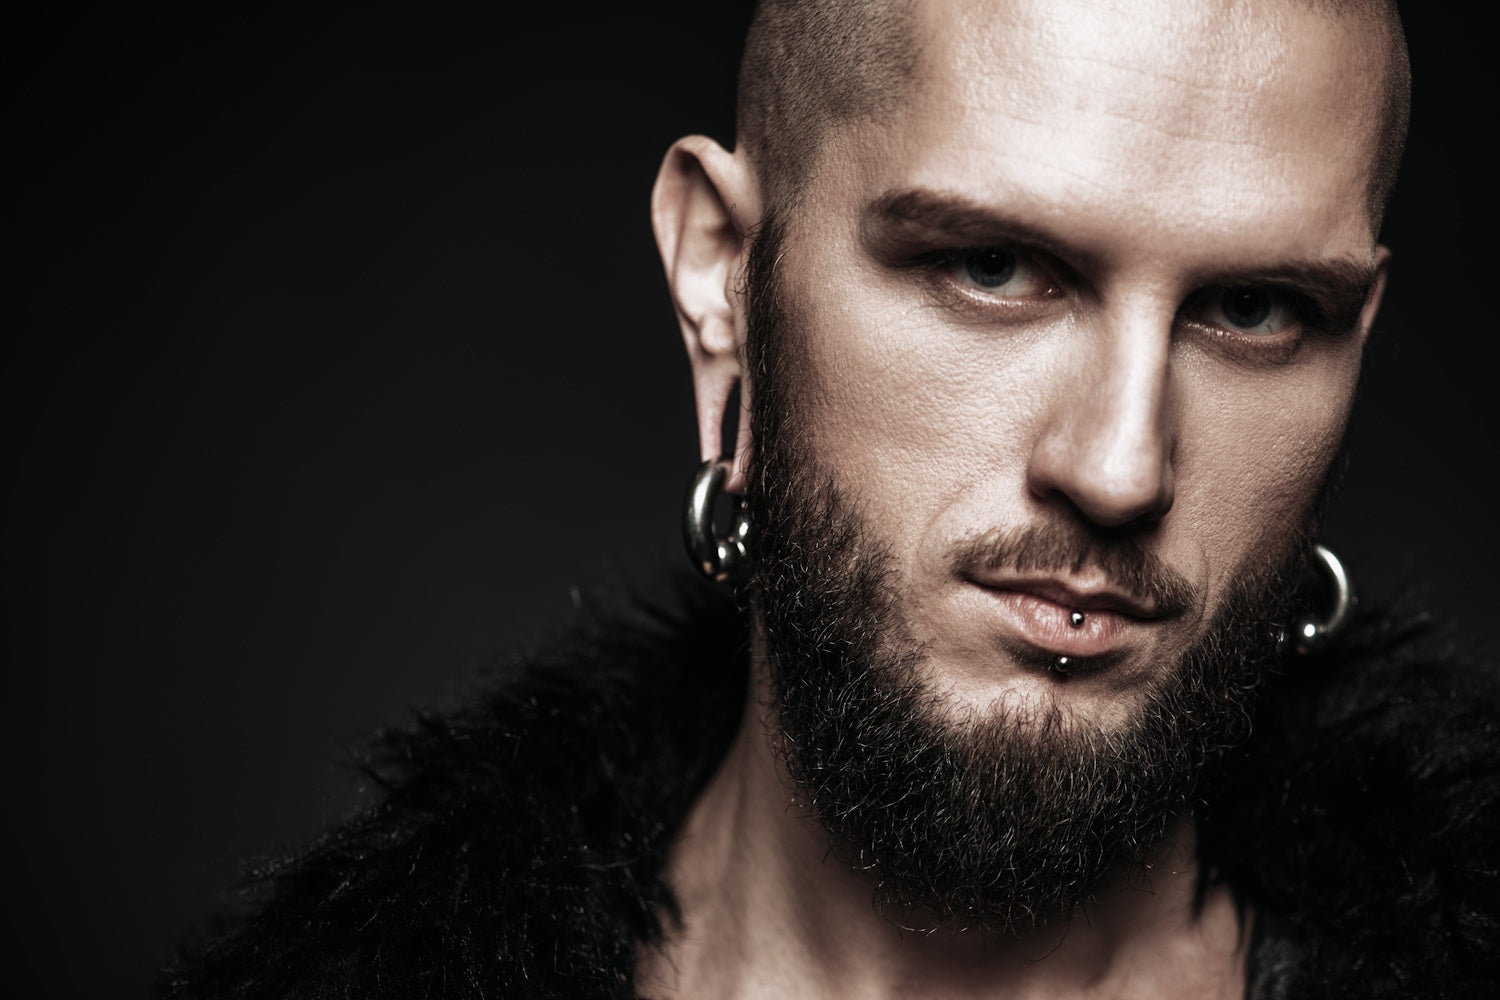 A man with many piercings on his face and ears.